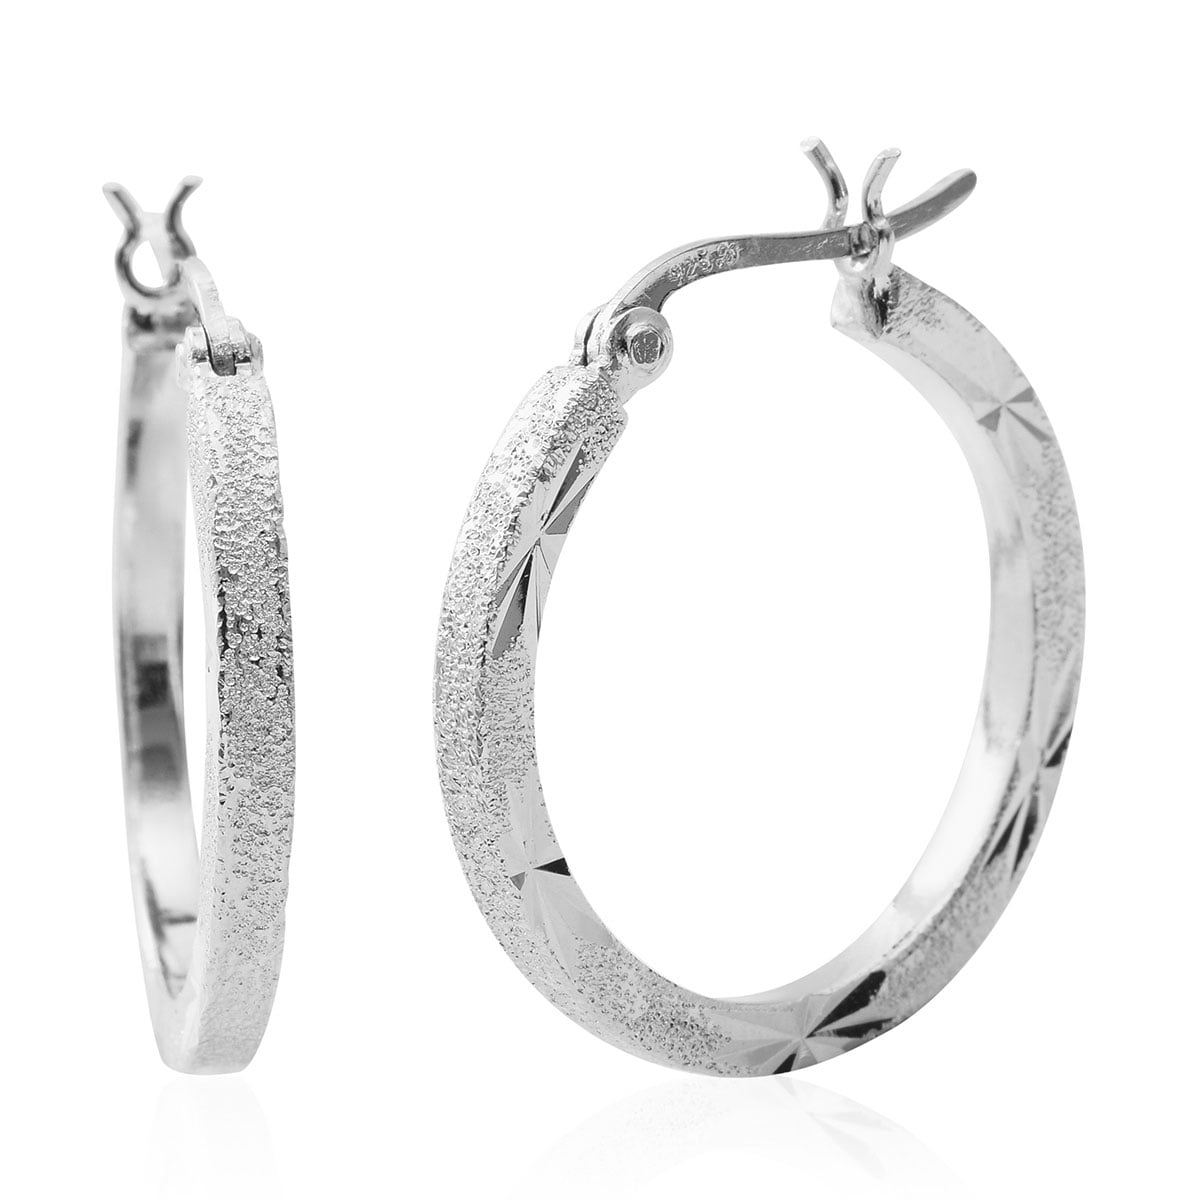 Shop LC - 925 Sterling Silver/Stainless Steel Round Hoops Hoop Earrings for Women Jewelry Gift (Click Top/Endless)